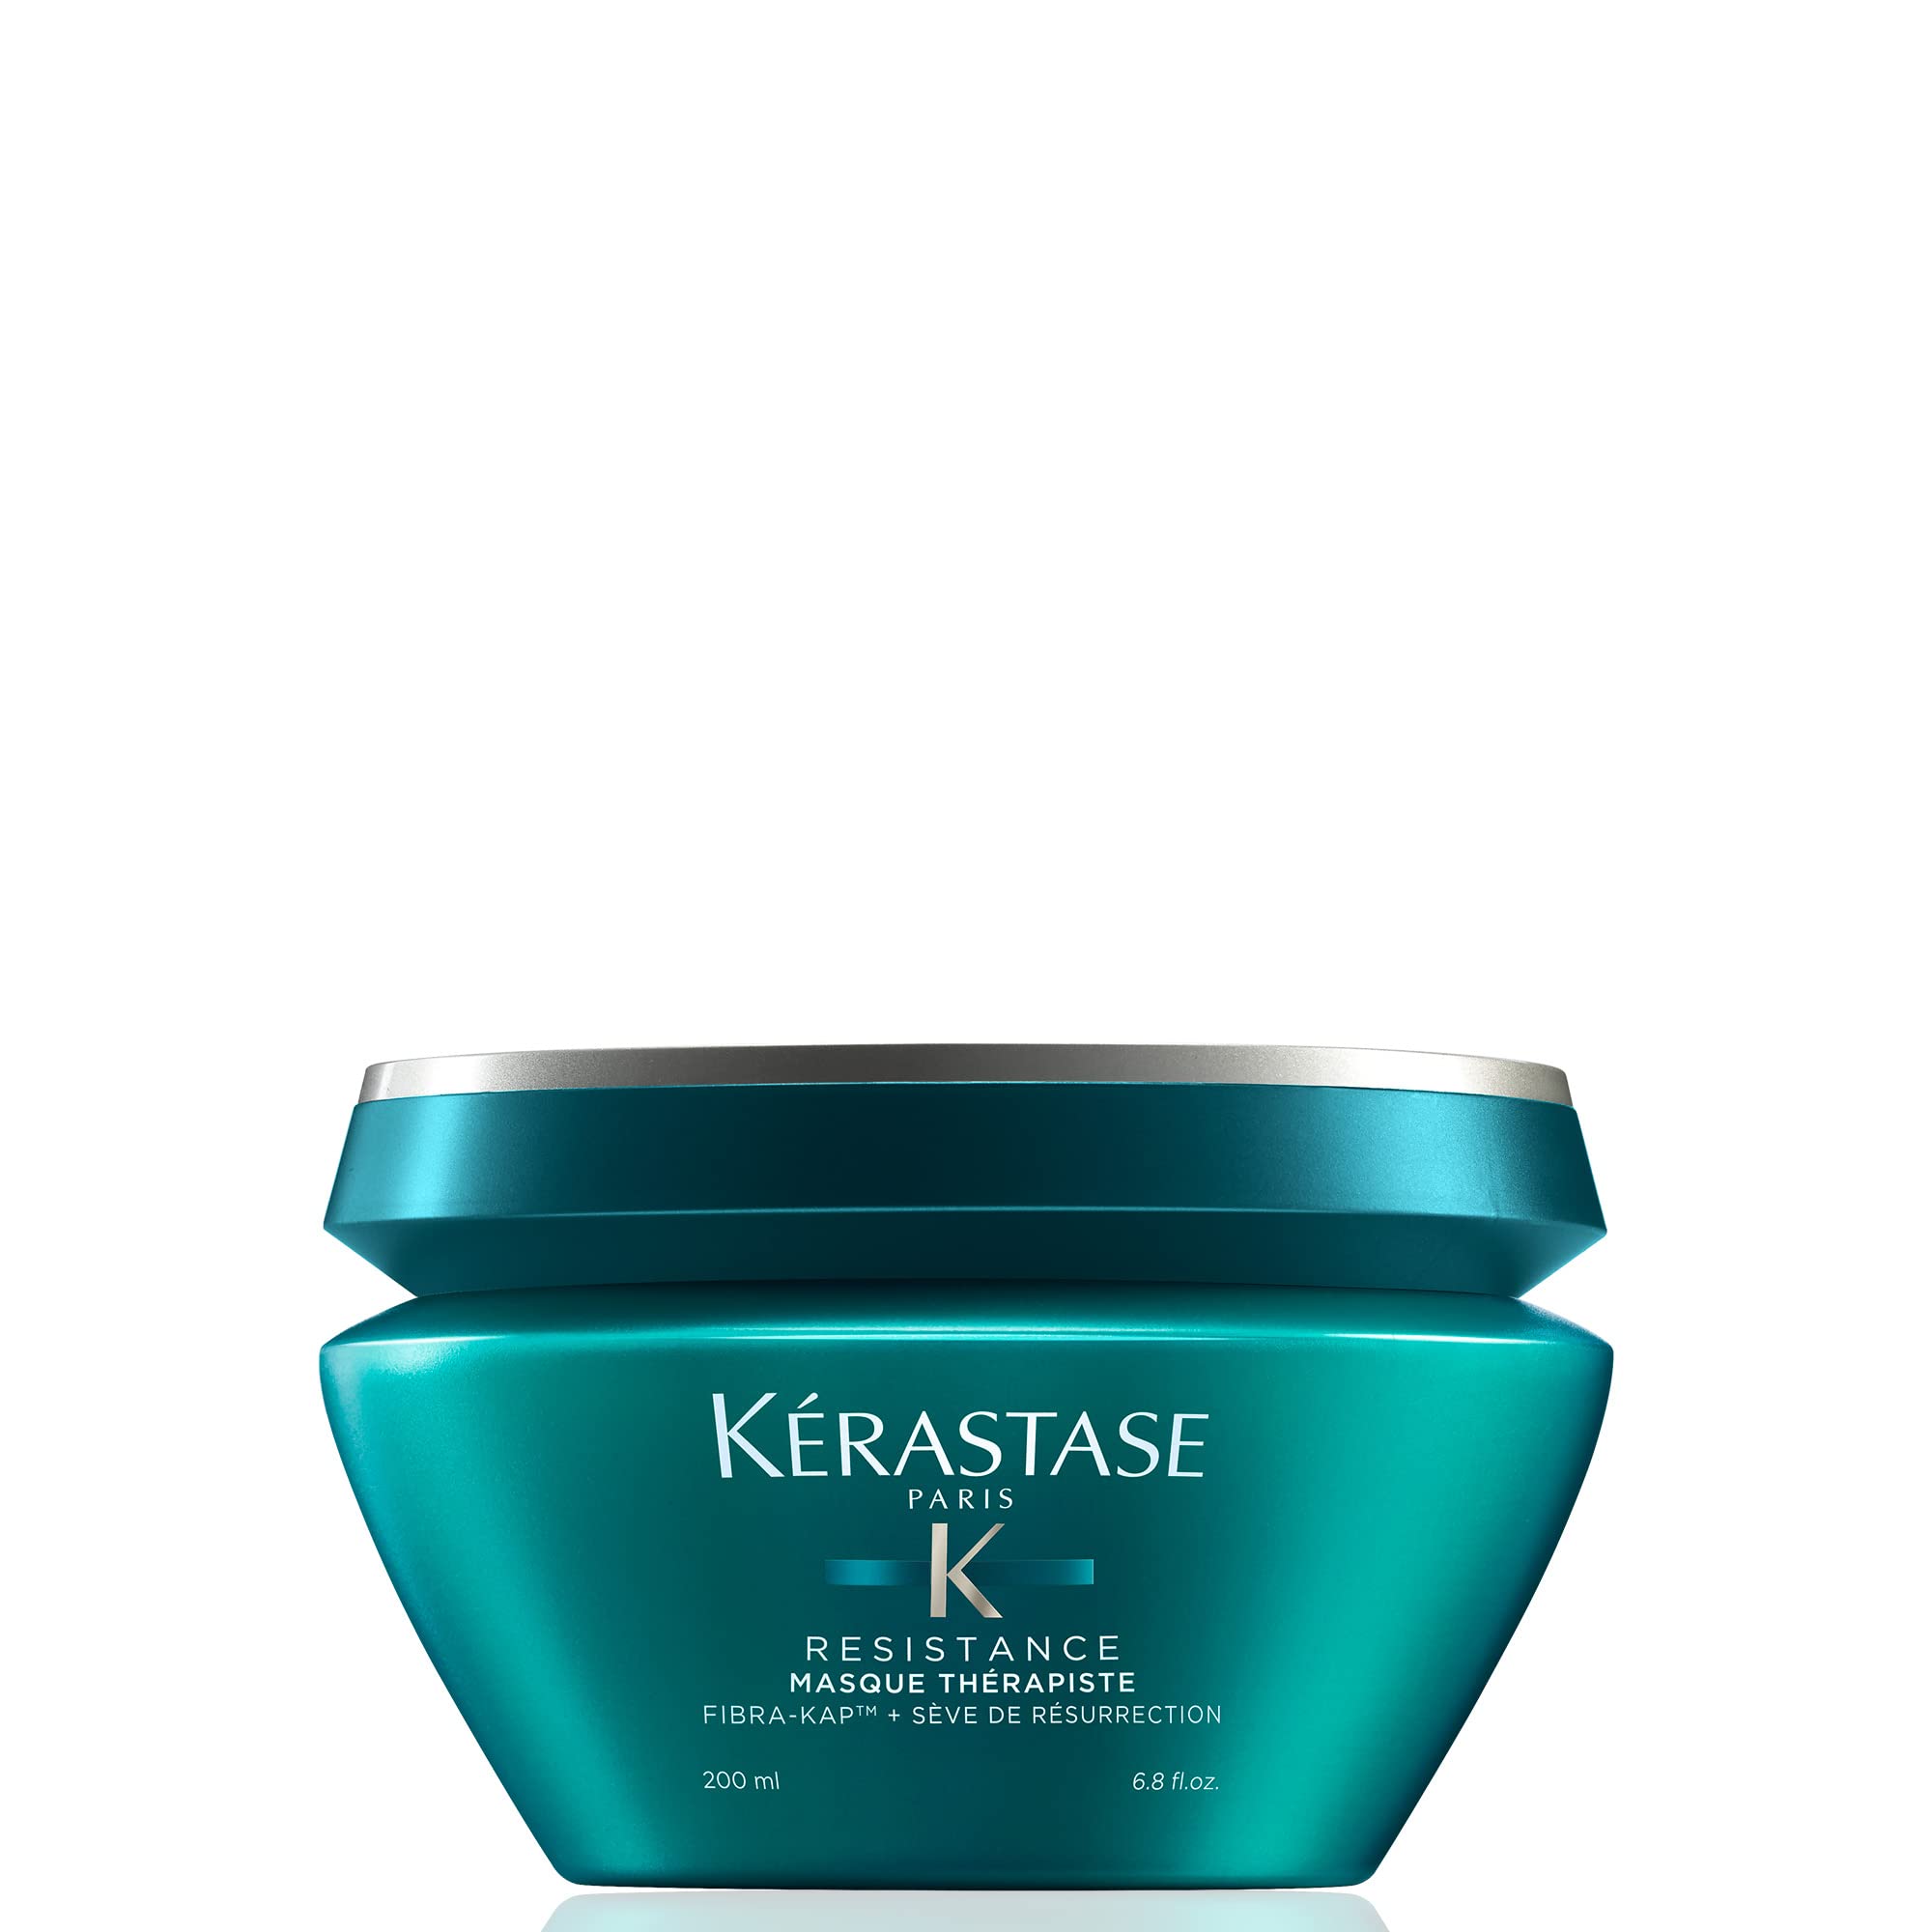 KERASTASE Resistance Therapiste Hair Mask | Repairing Cream for Weak, Over-Processed and Damaged Hair | Strengthens and Deeply Nourishes | Protects Against Breakage | For Weak Hair | 6.8 Fl Oz